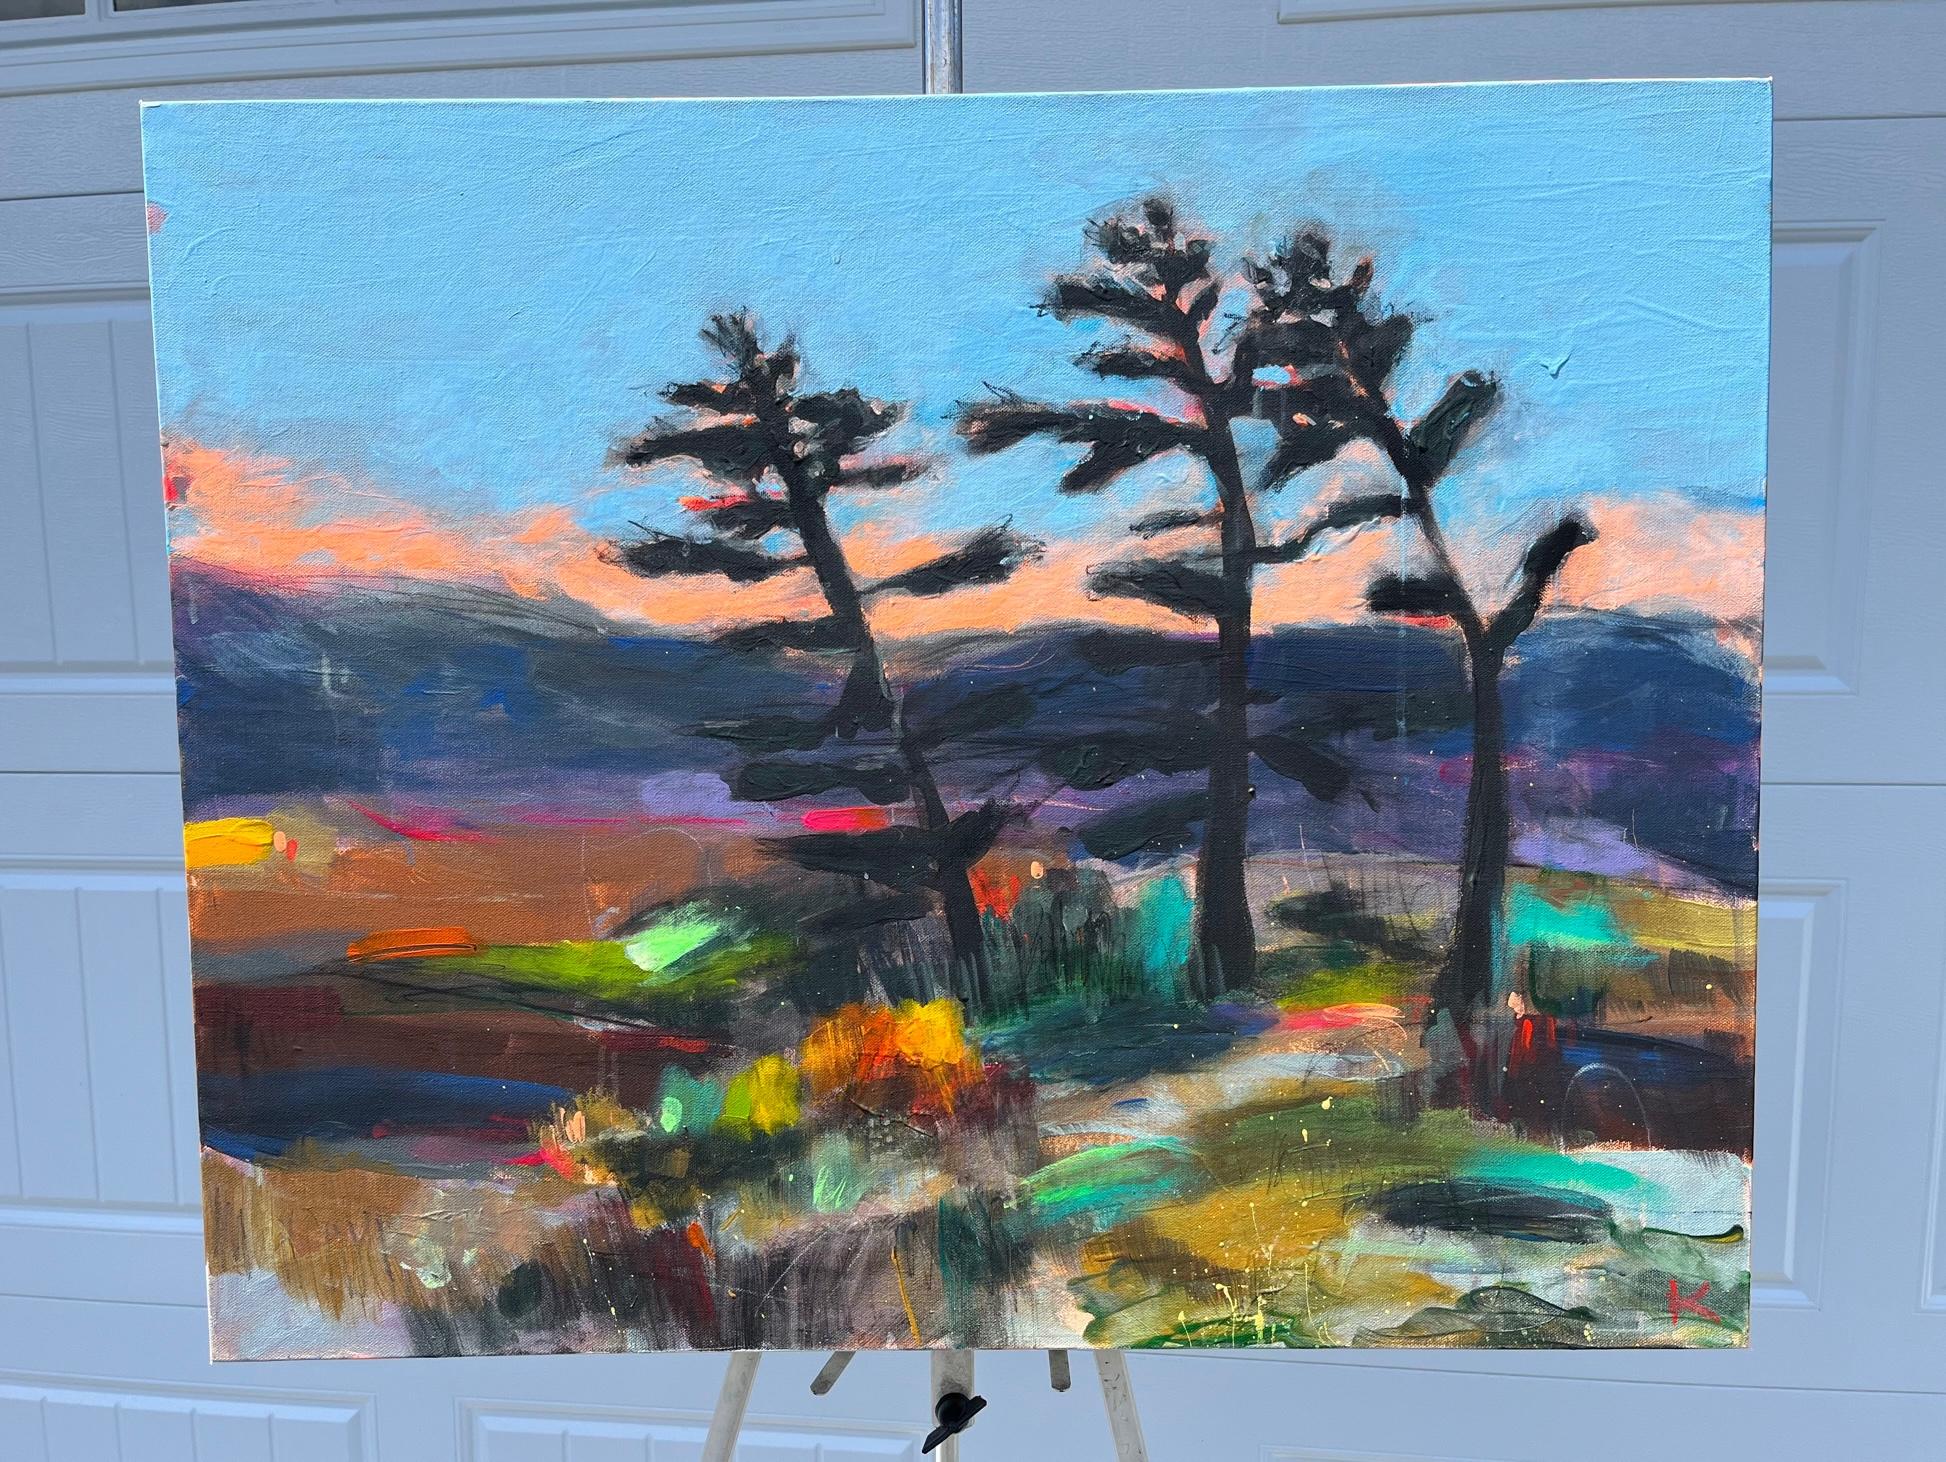 <p>Artist Comments<br>Artist Rebecca Klementovich paints an expressive landscape inspired by her retreats in Maine. She pictures pine trees during the climatic point of sunset, wistfully fading into the misty horizon. 